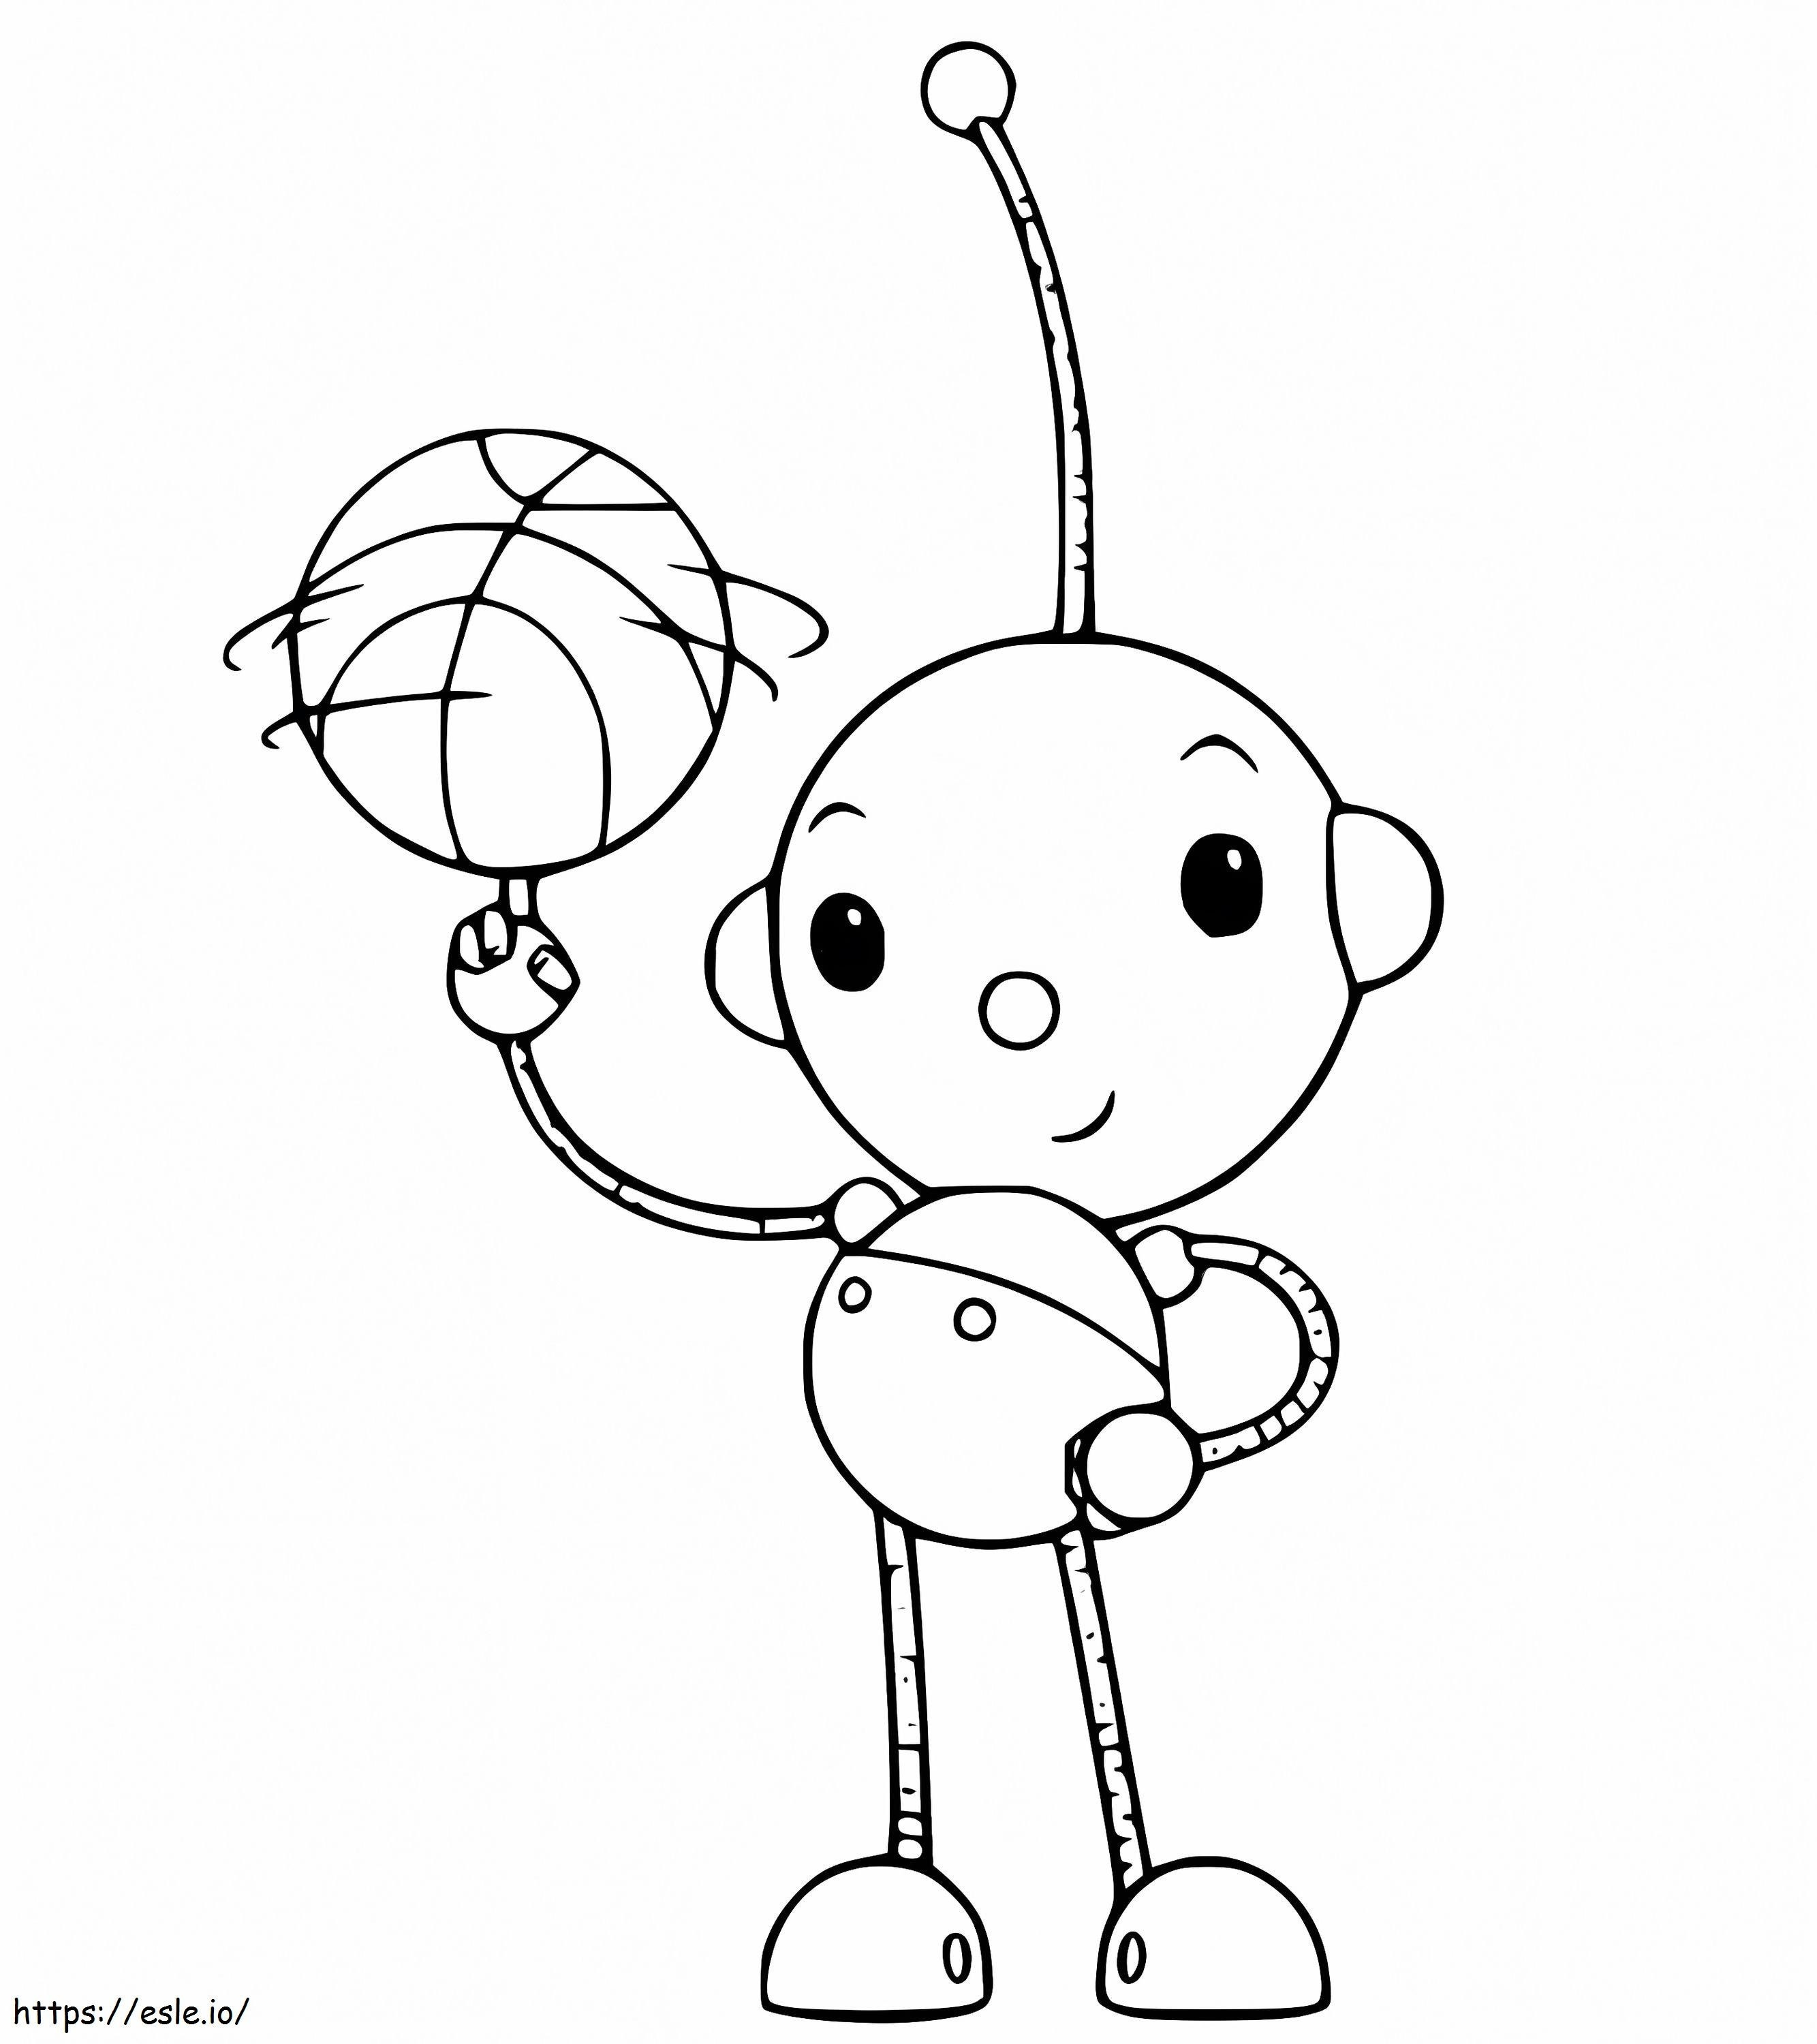 Olie Polie And Ball coloring page